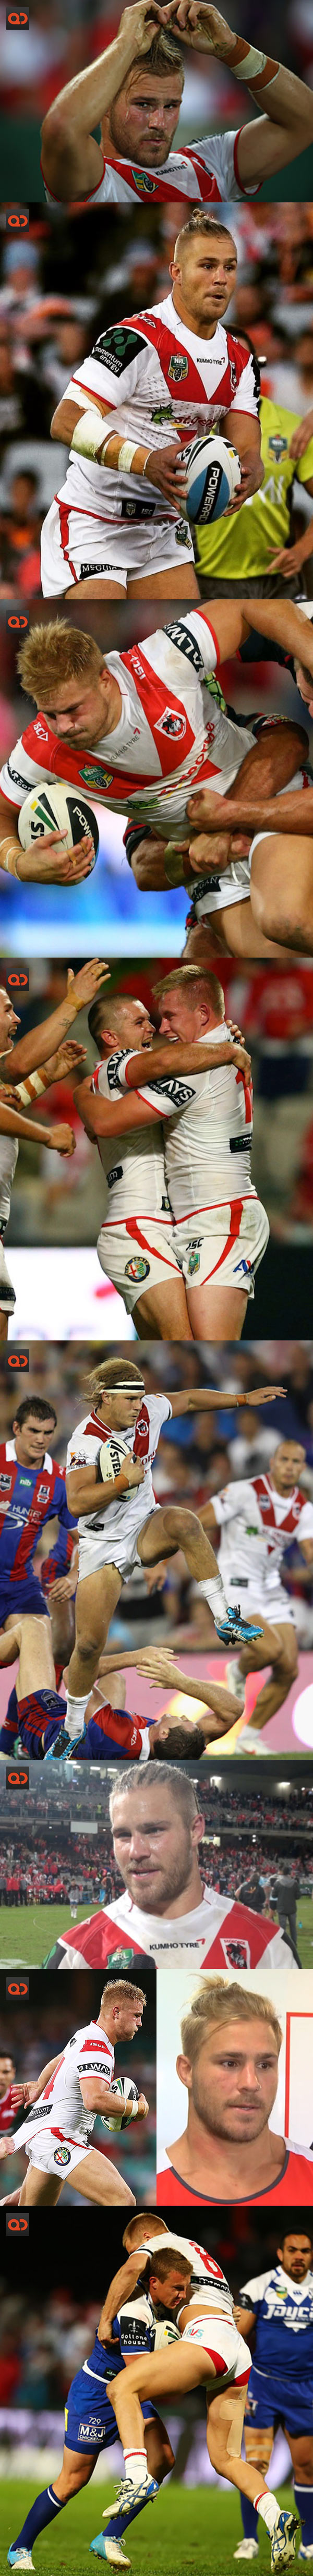 qc-aussie_rugby_player_jack_de_belin_exposed_his_butt_on_the_field-collage02